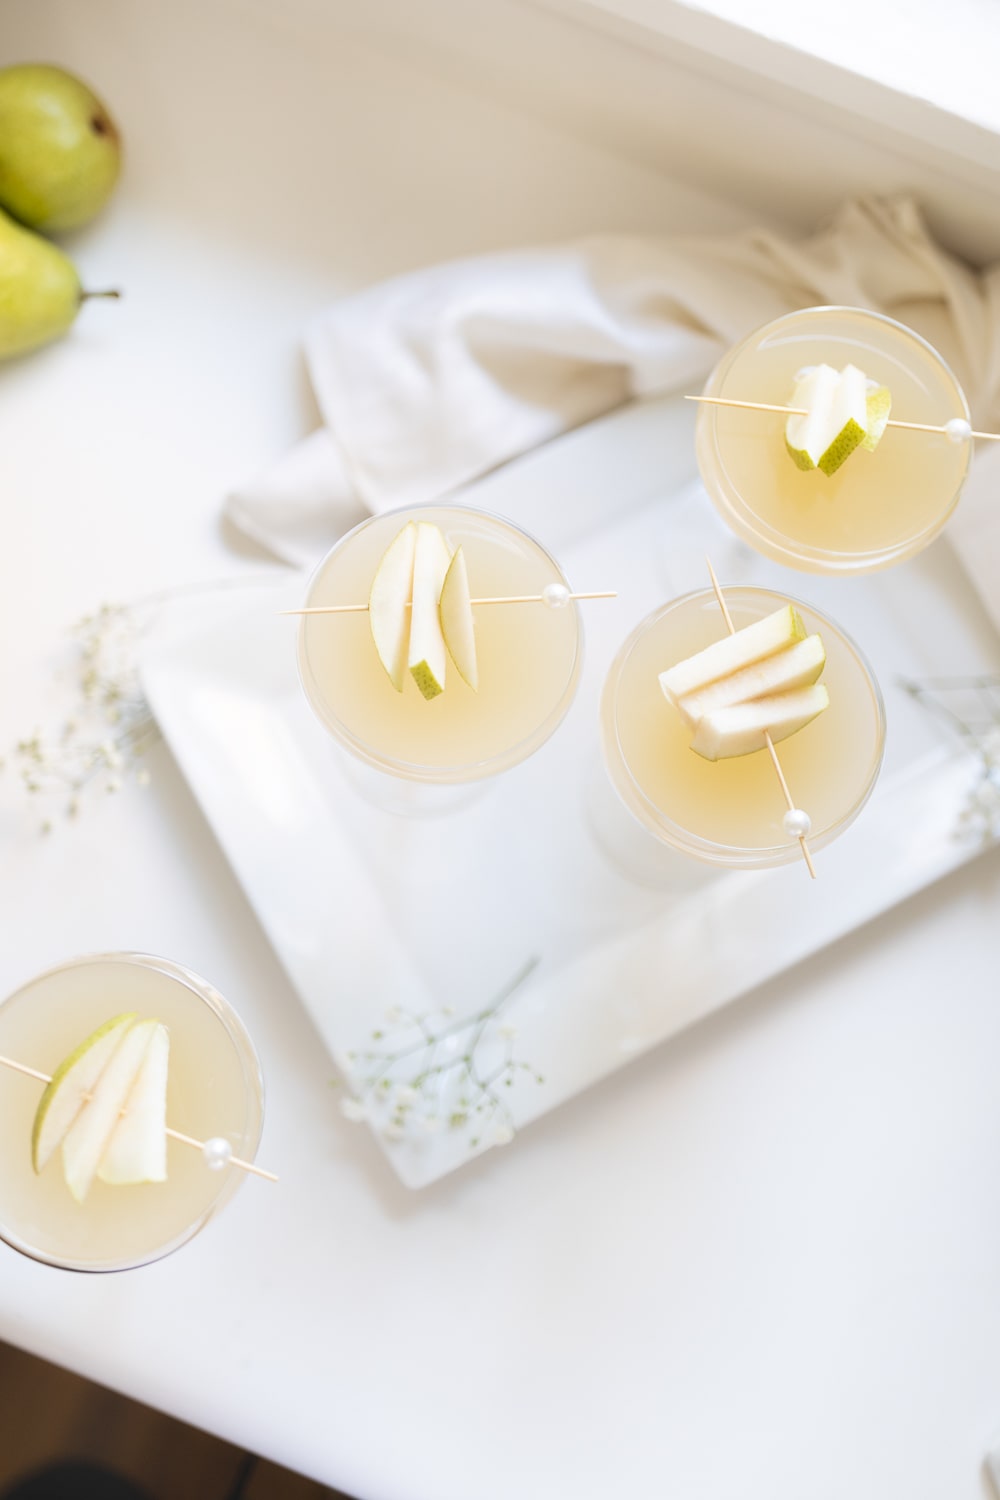 Easy champagne cocktails for new years from blogger Stephanie Ziajka on Diary of a Debutante